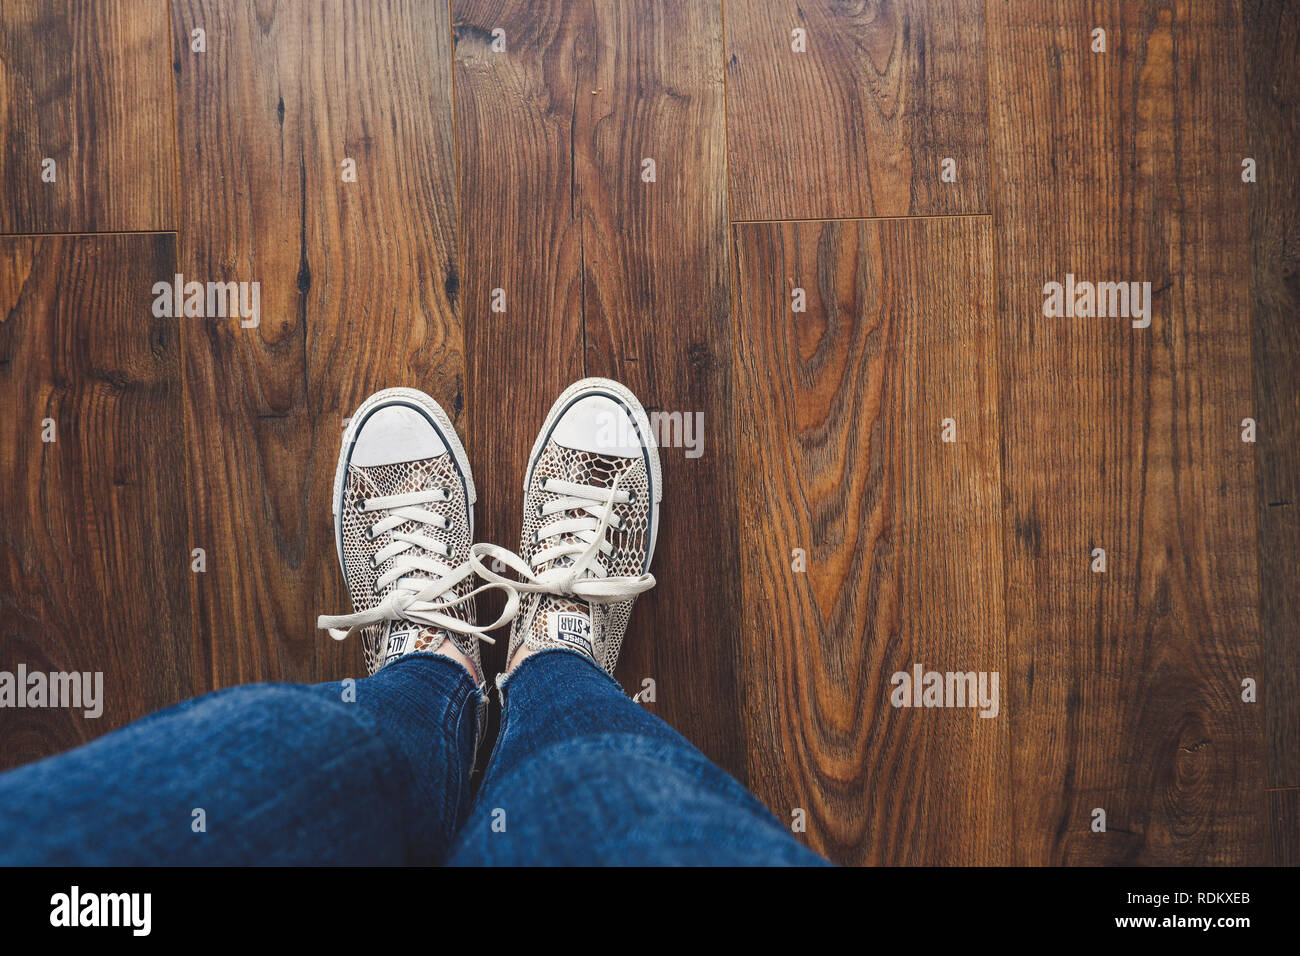 Converse all star shoes / trainers with an animal print, photographed against wooden floor Stock Photo